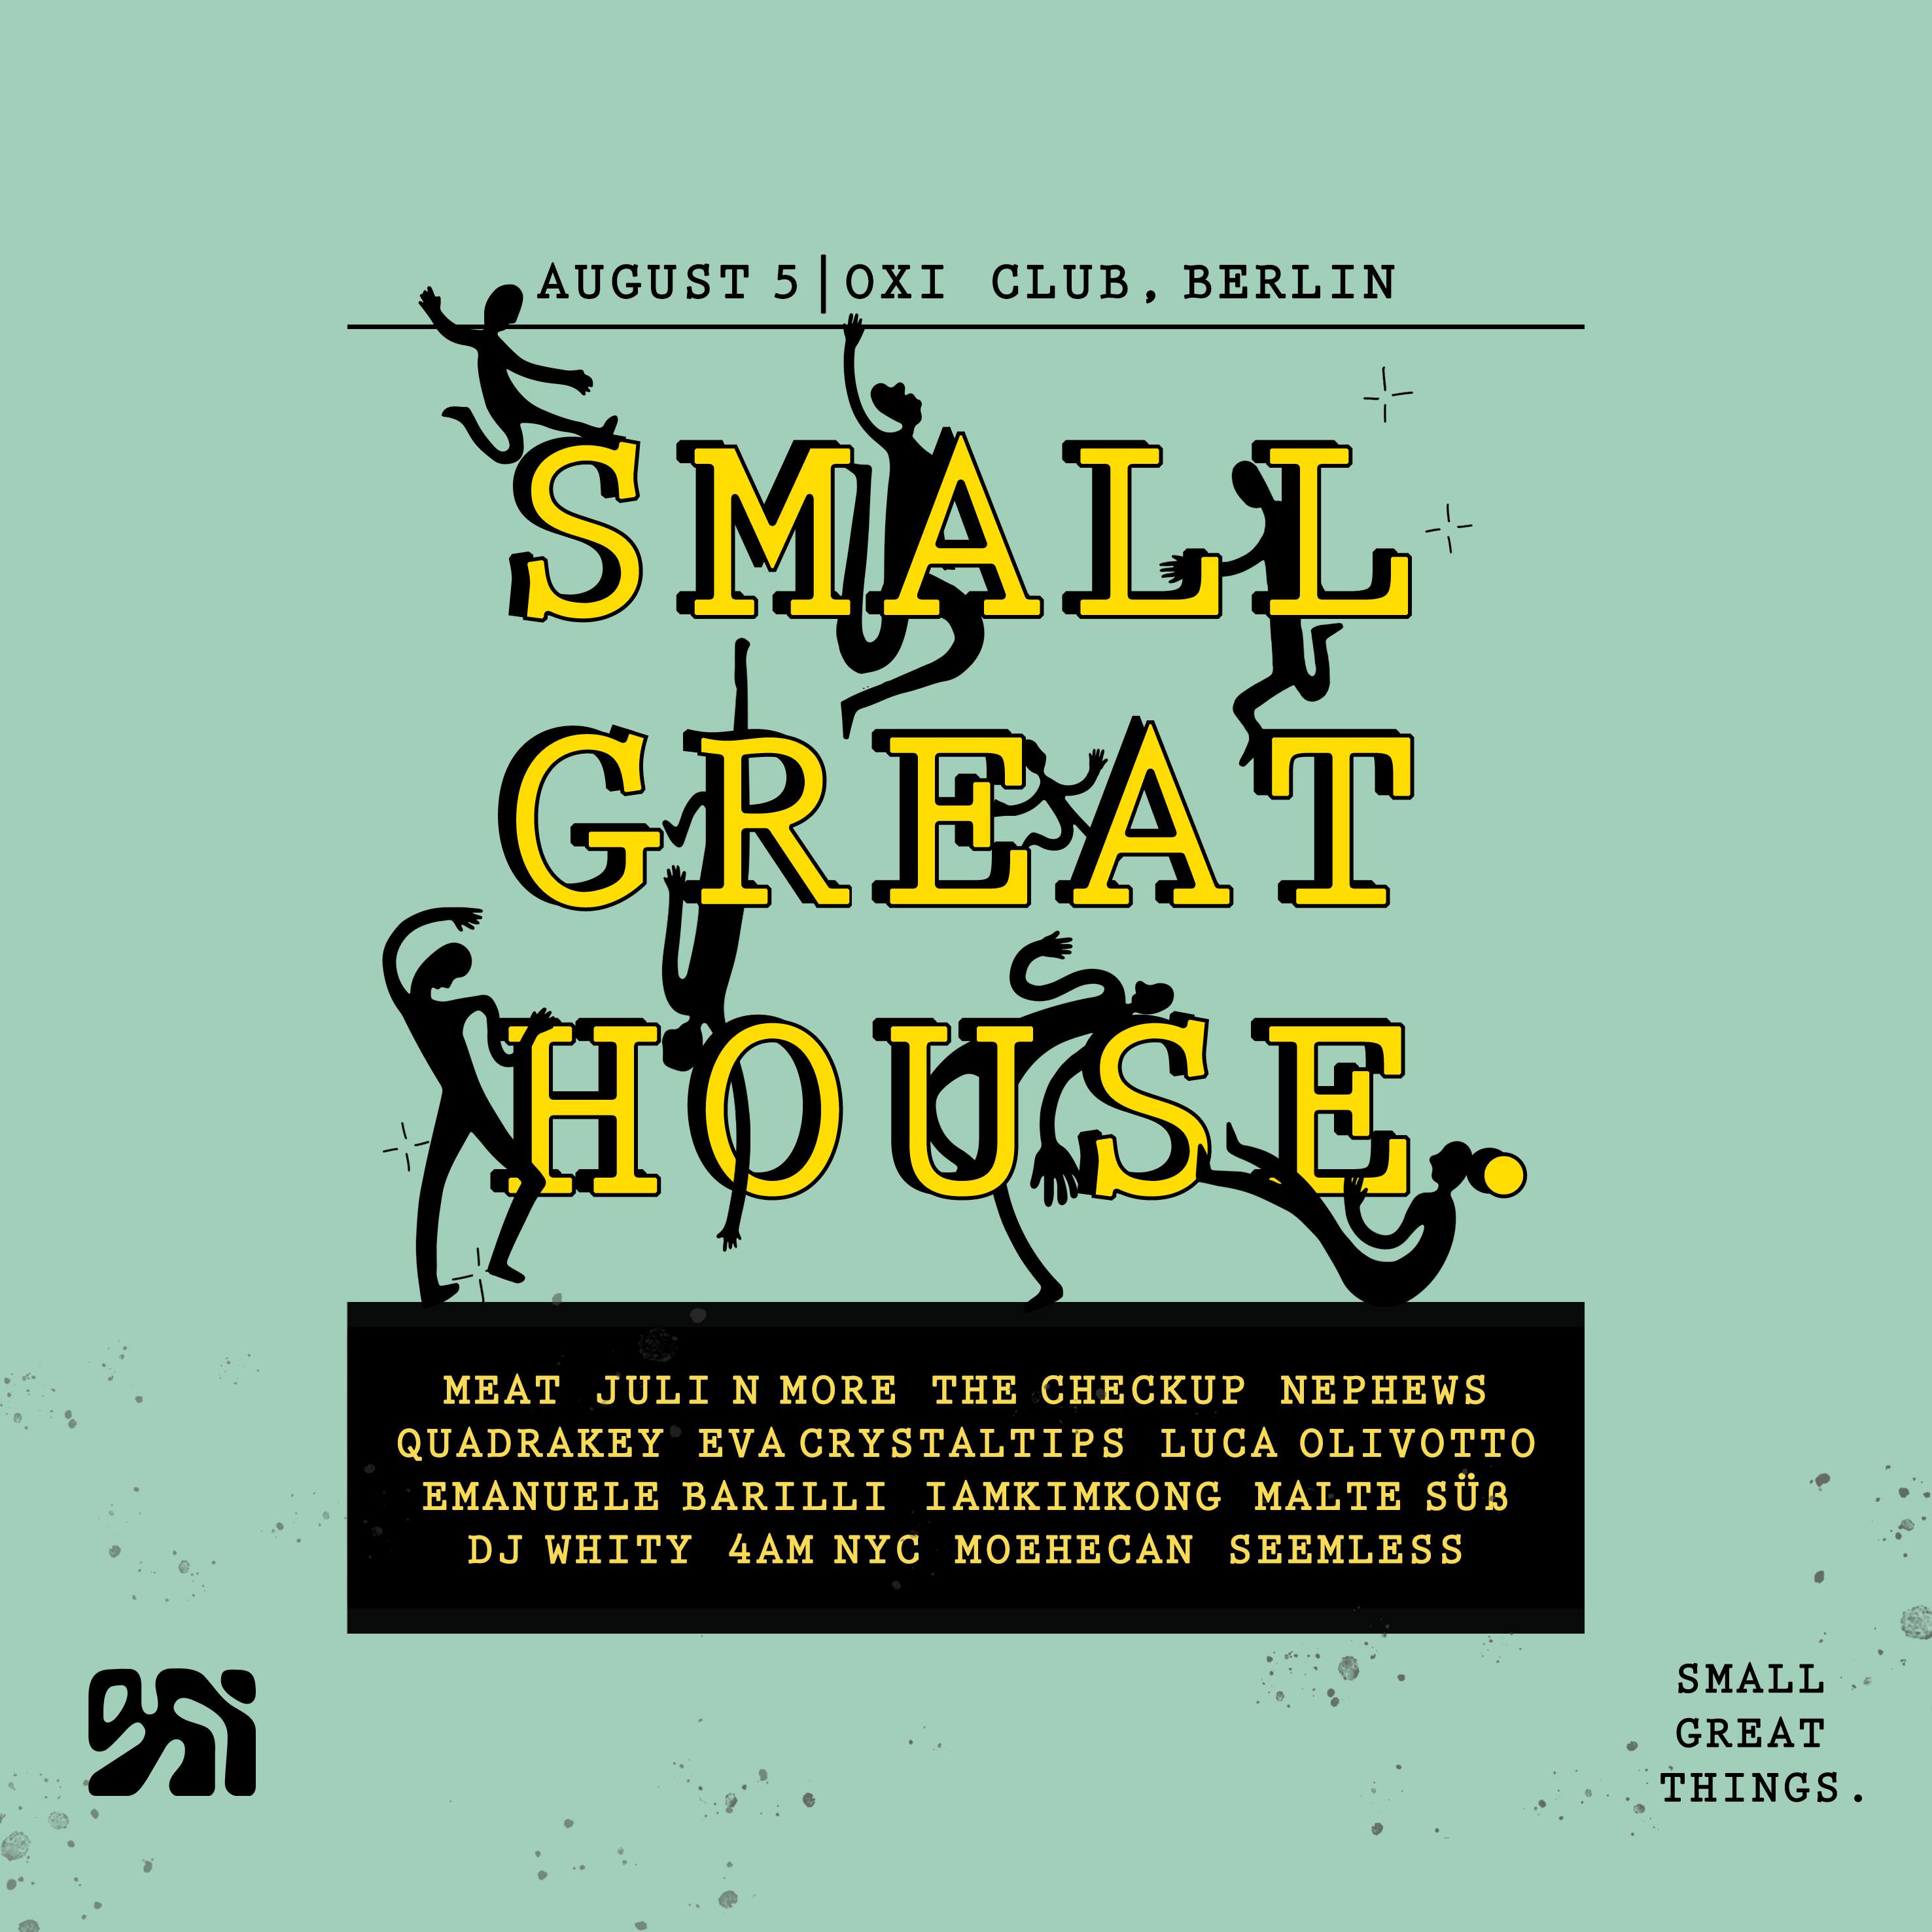 Small Great House (Small Great Things. OPEN AIR + INDOOR) - Página trasera